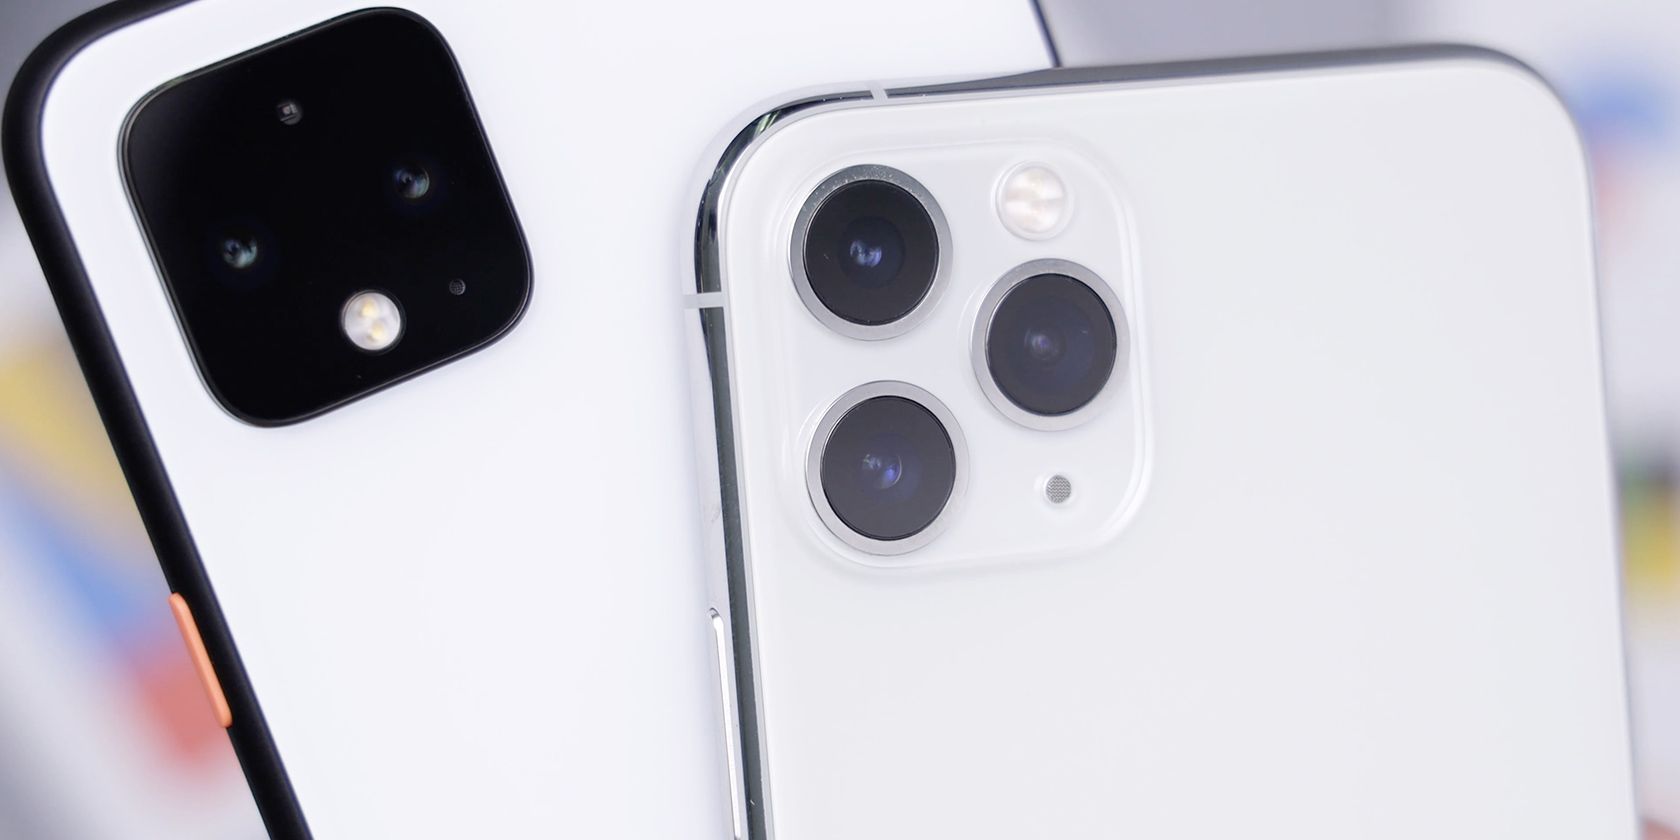 Pixel and iPhone side-by-side